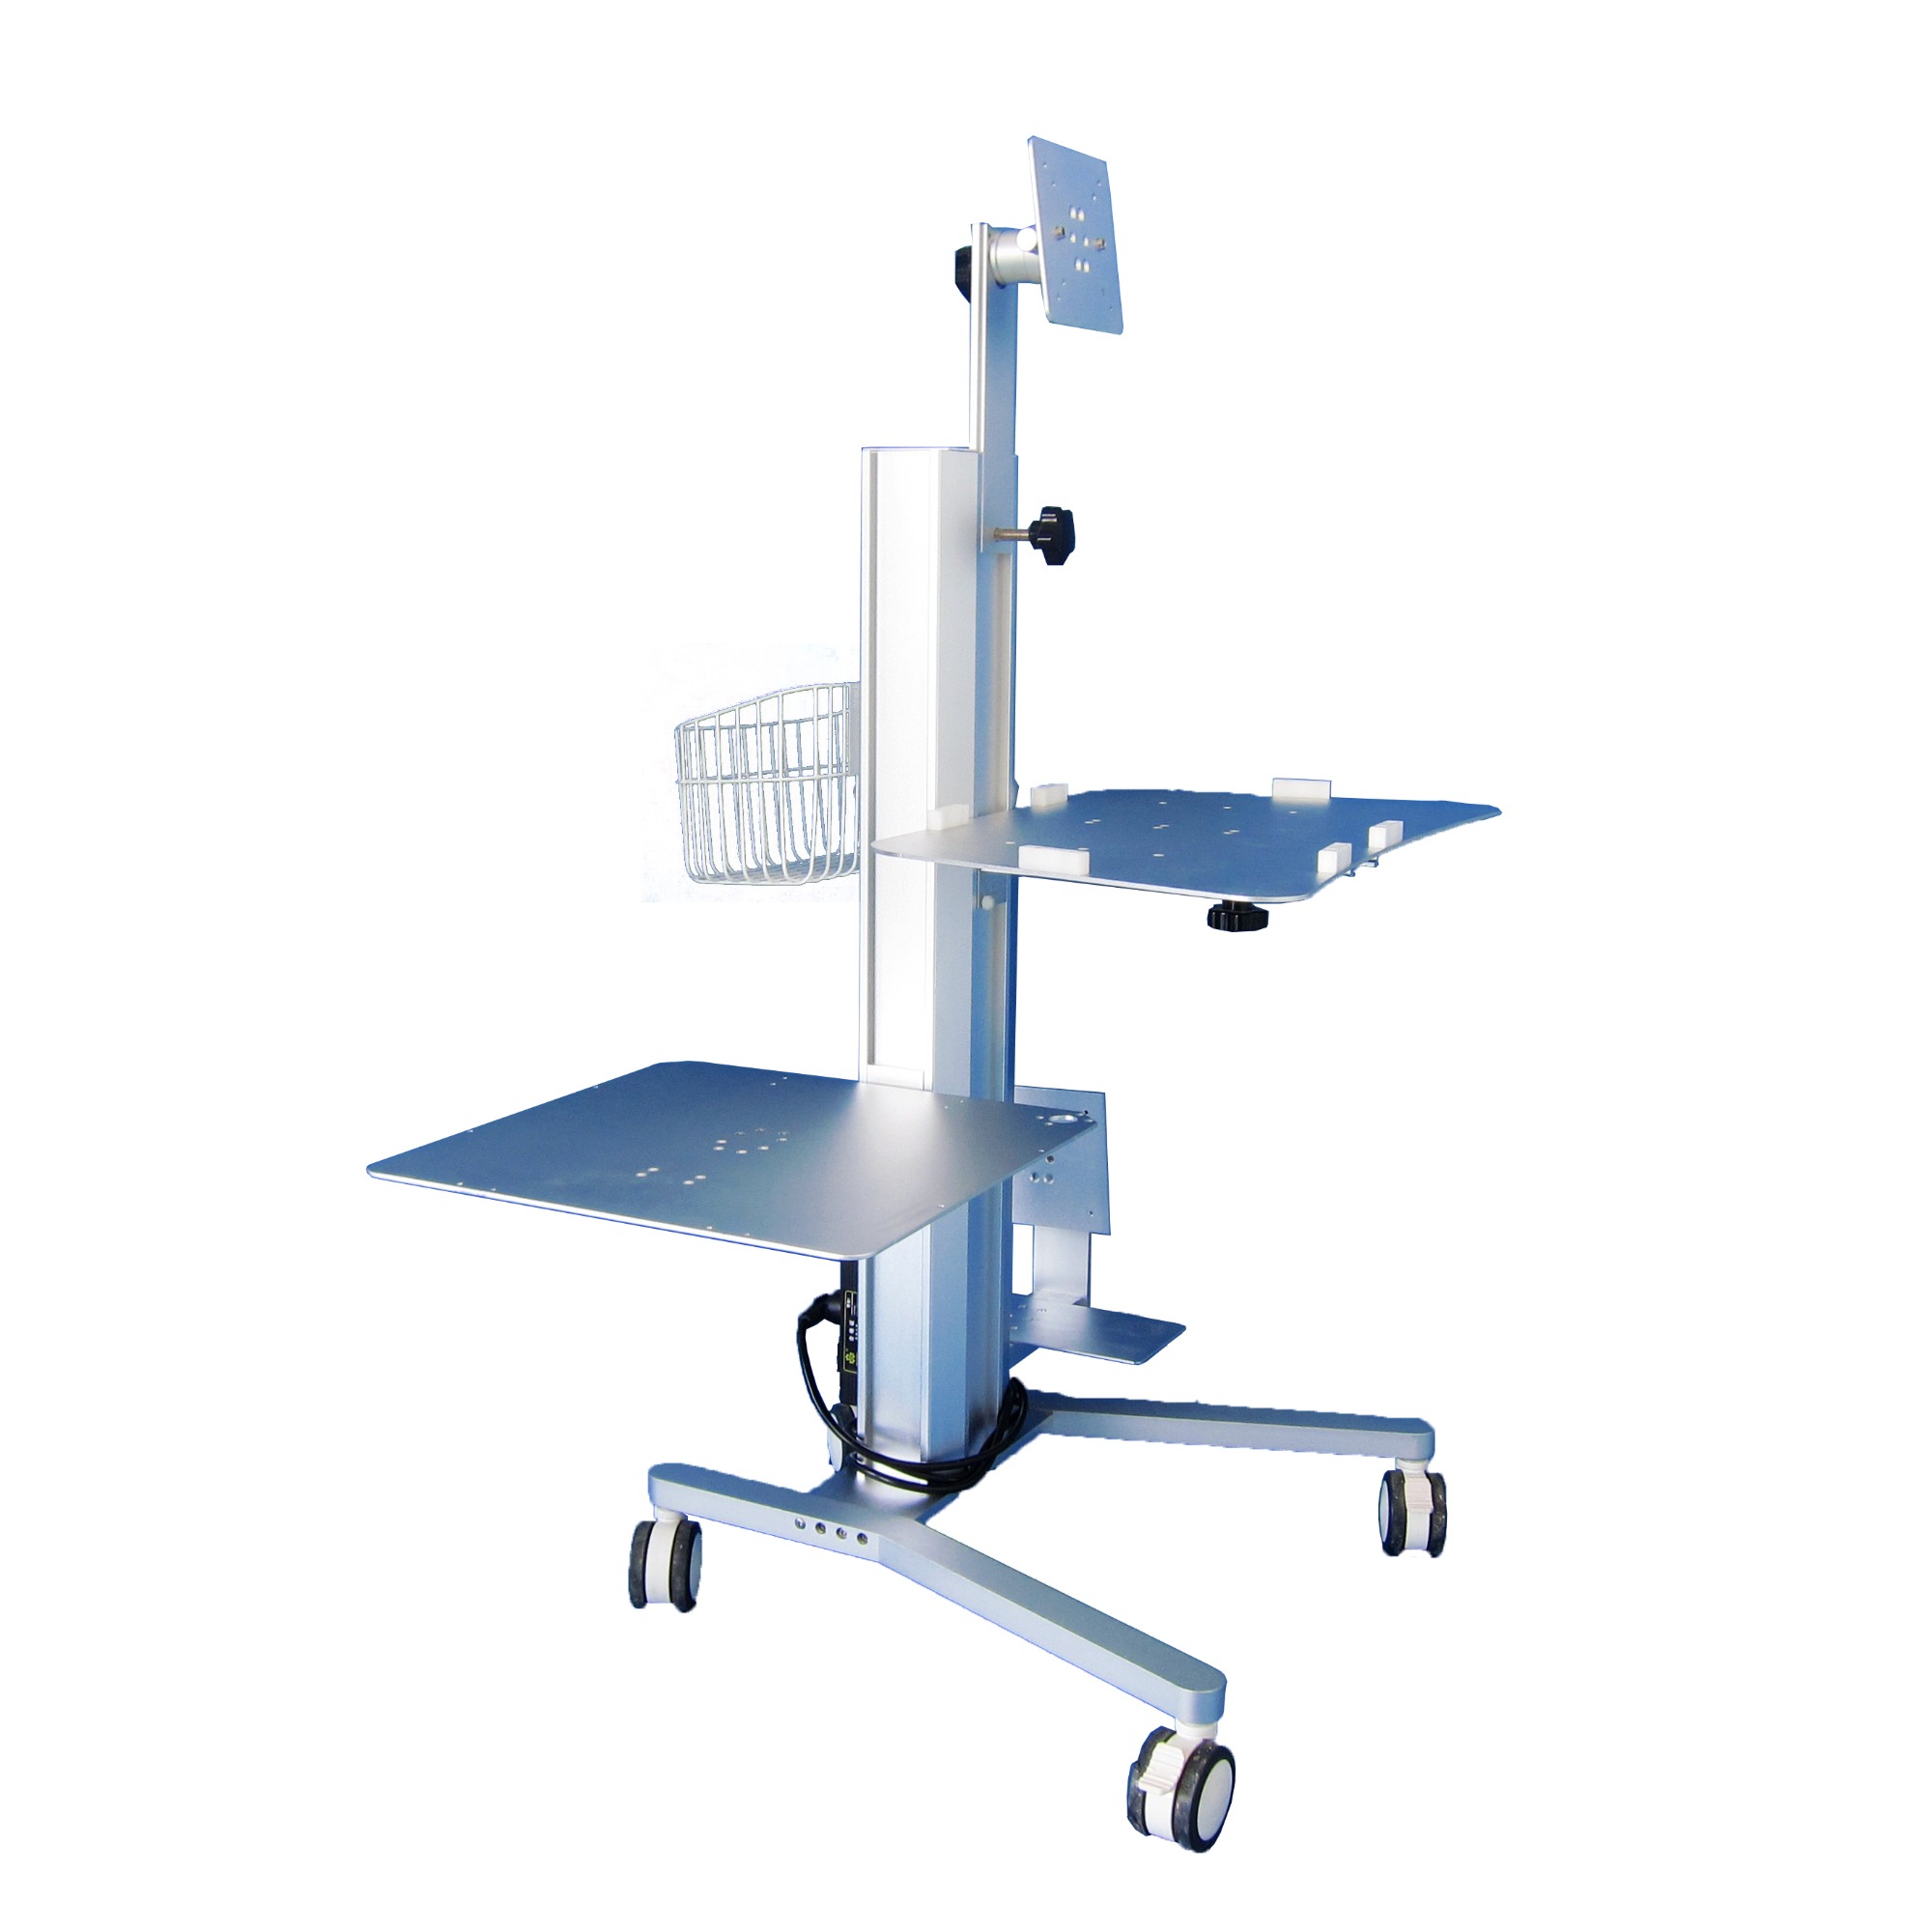 2021 high quality Guaranteed therapeutic equipment medical trolley working trolley station hospital trolly